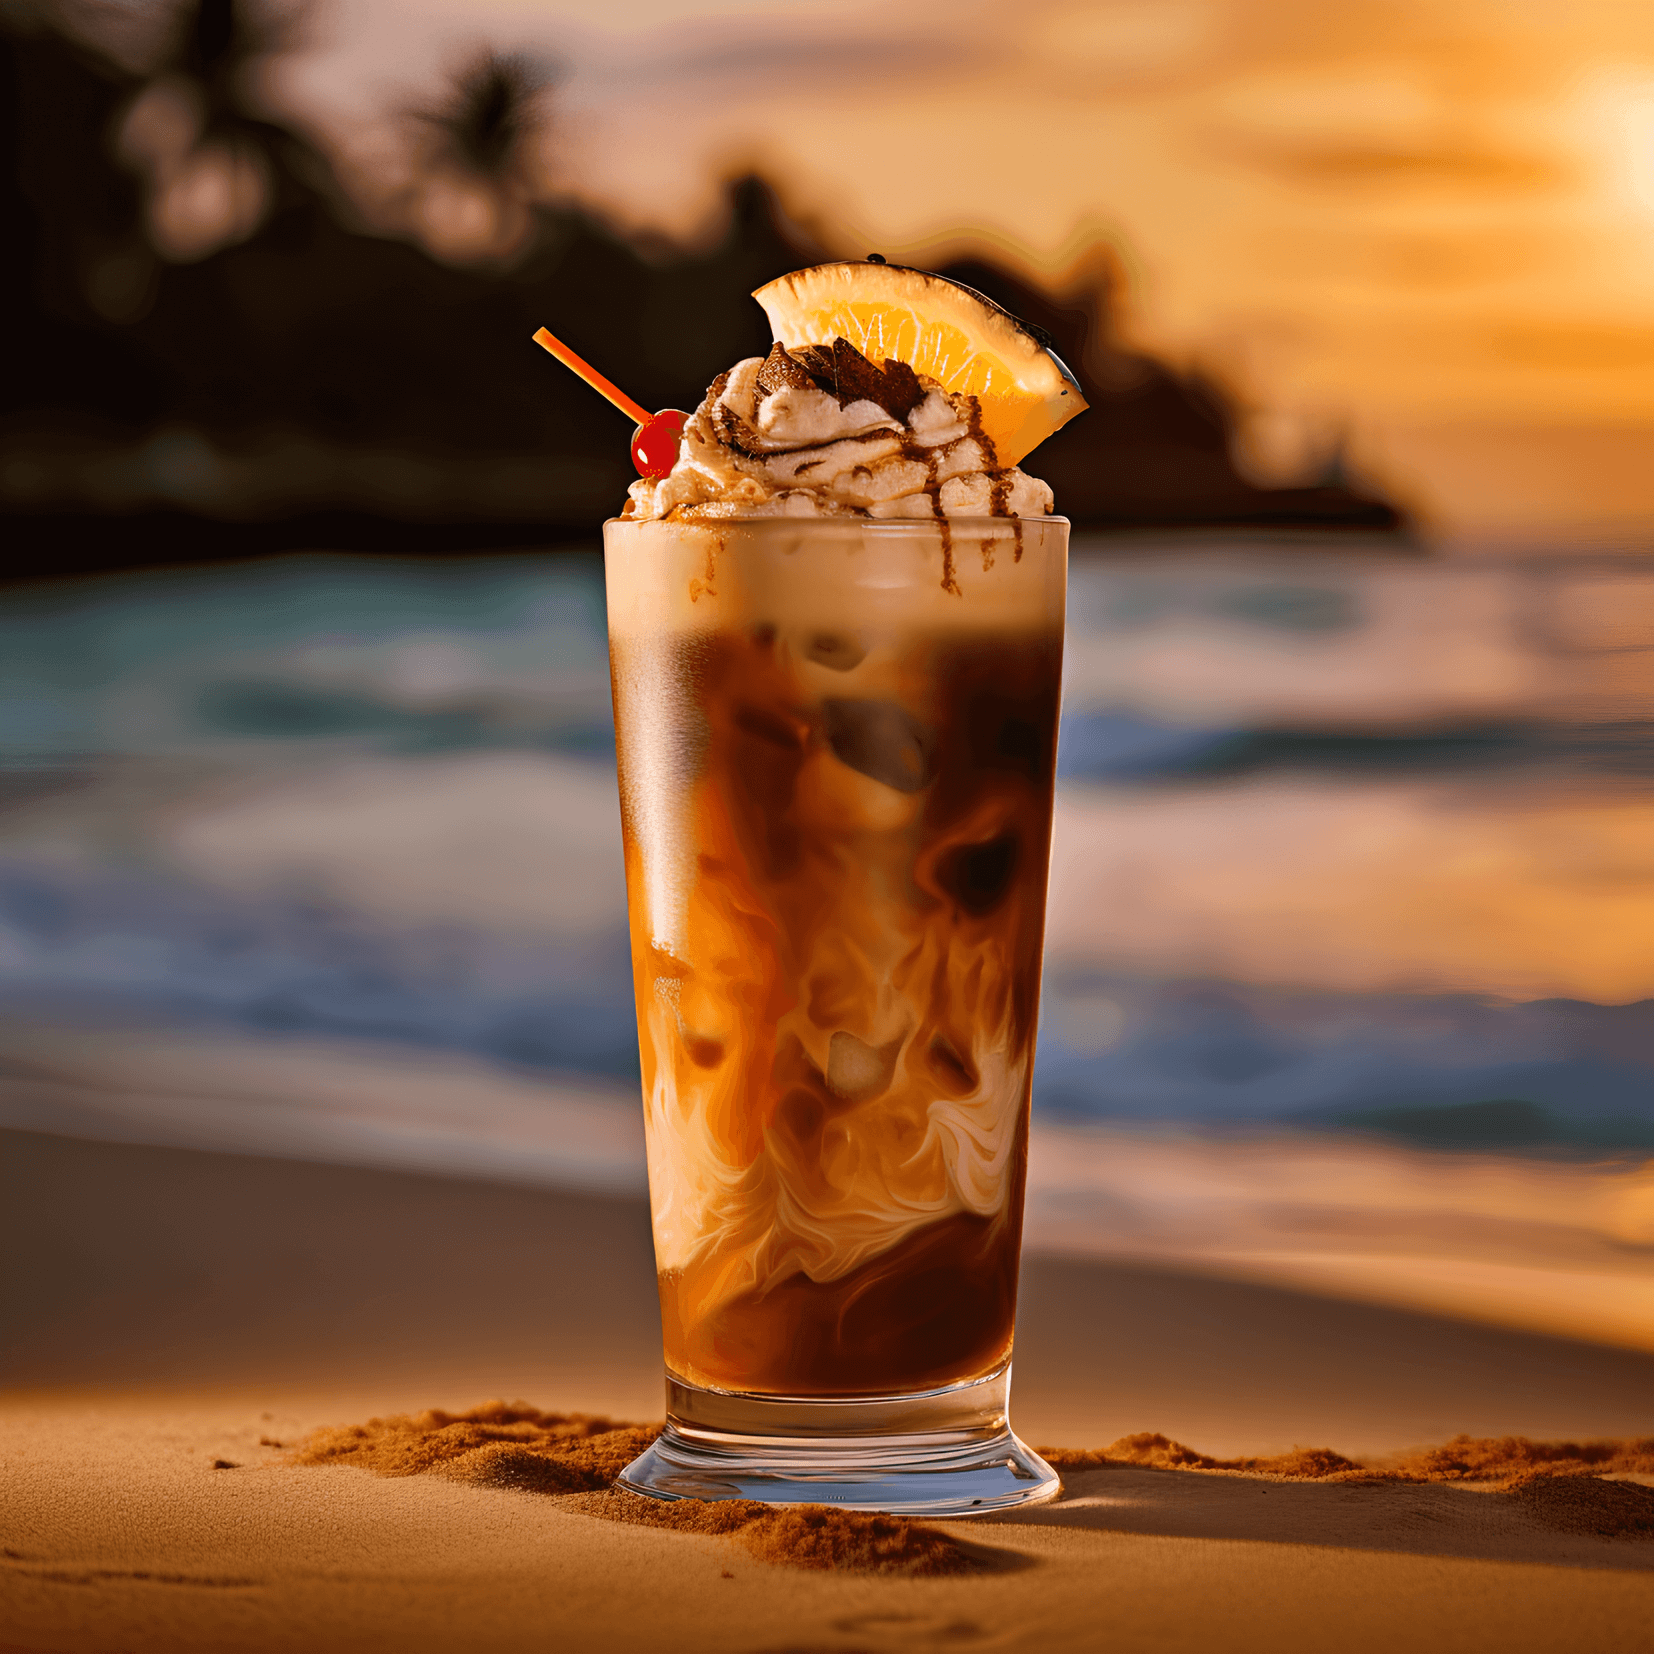 Bushwacker Cocktail Recipe - The Bushwacker cocktail is a creamy, rich, and indulgent drink with a velvety texture. It has a sweet, chocolatey taste with hints of coffee and coconut. The rum adds a subtle warmth and depth to the flavor profile.